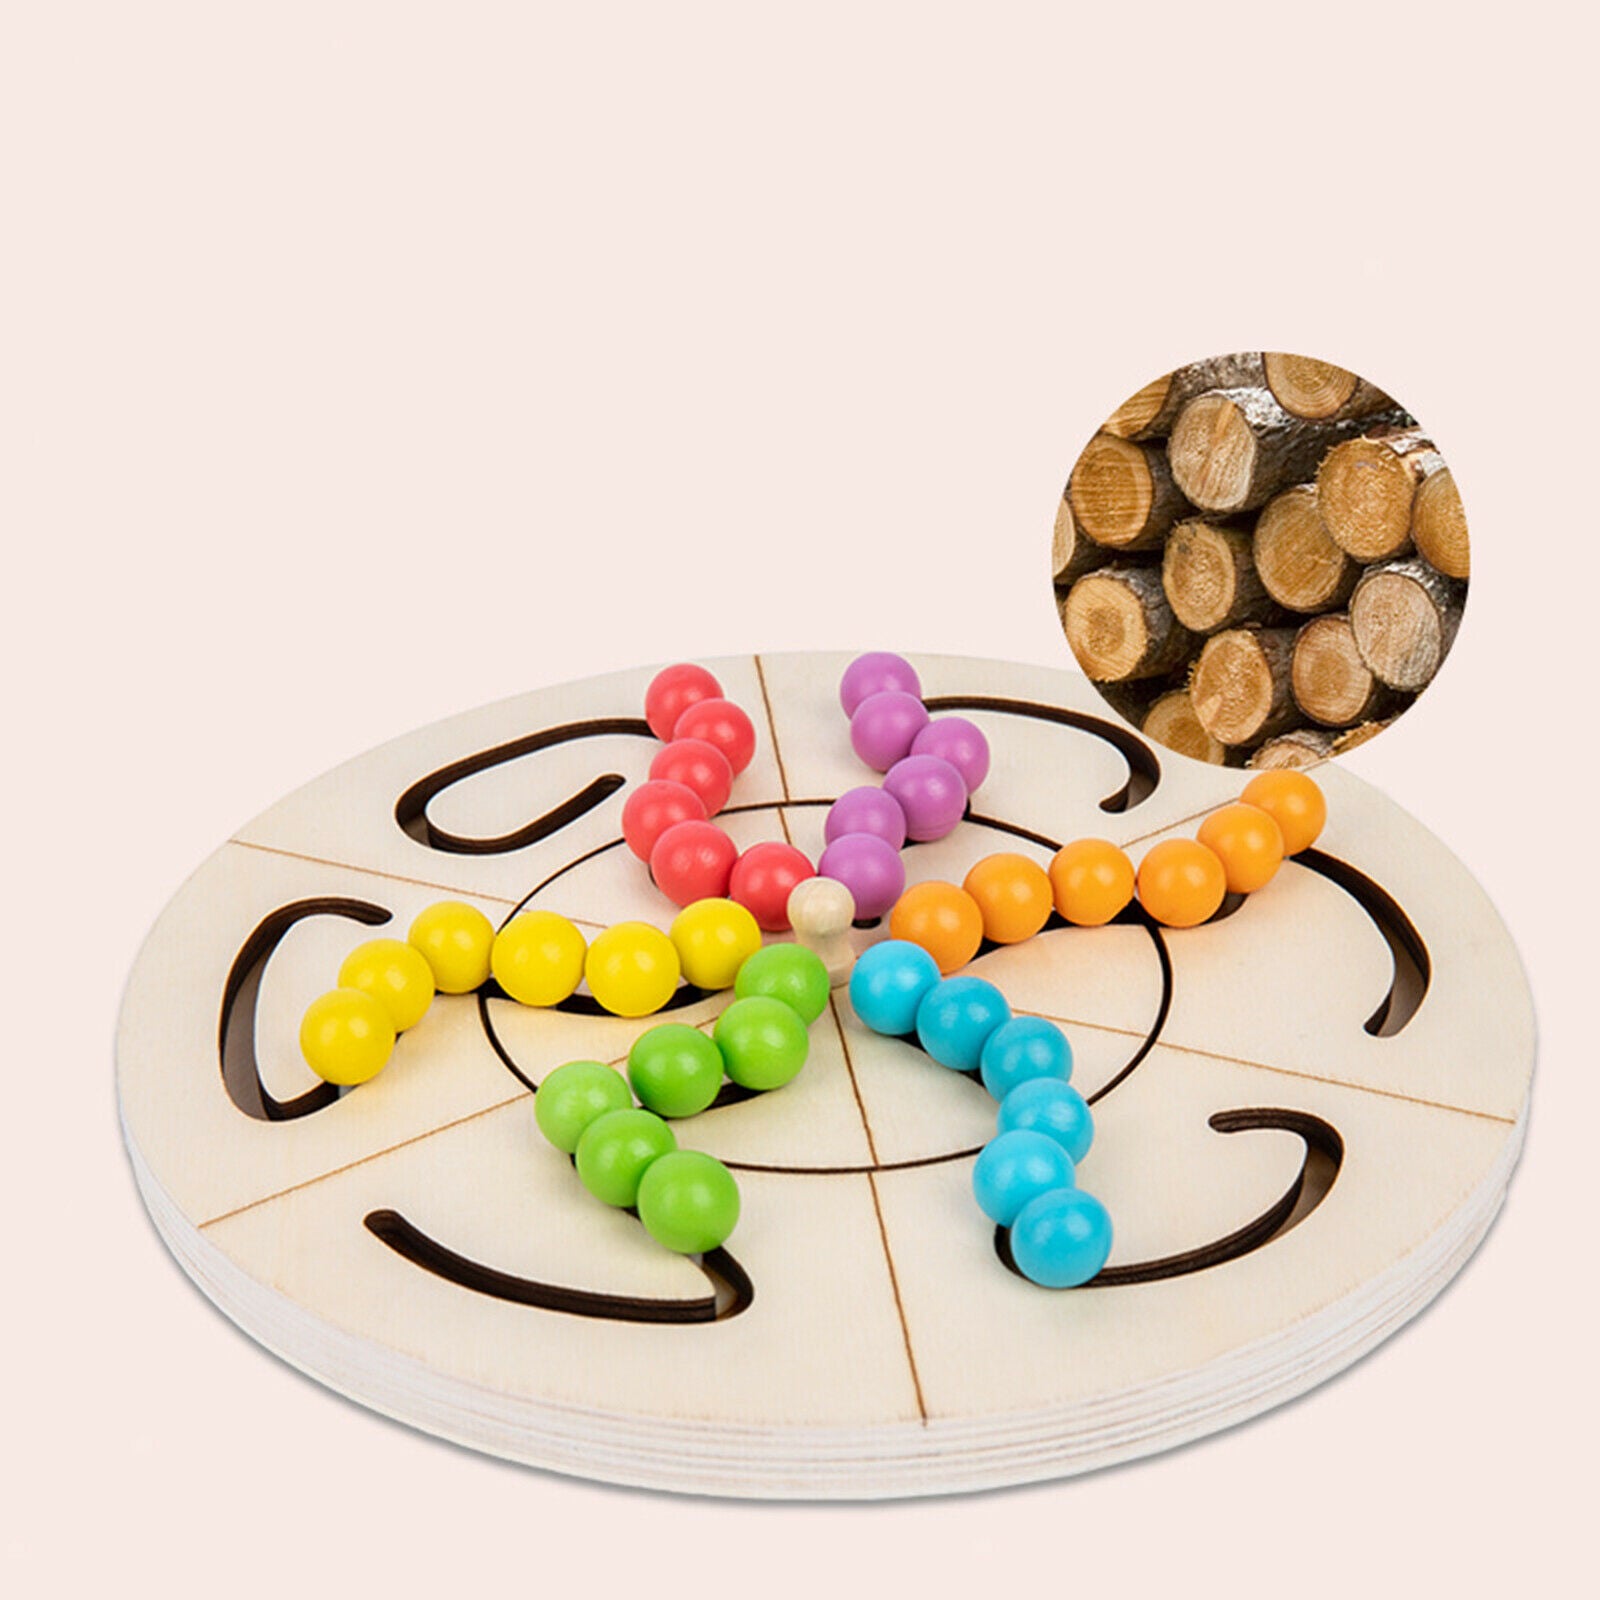 Bead Maze Puzzle Toys Multifunctional Infant Educational Board Game Gift